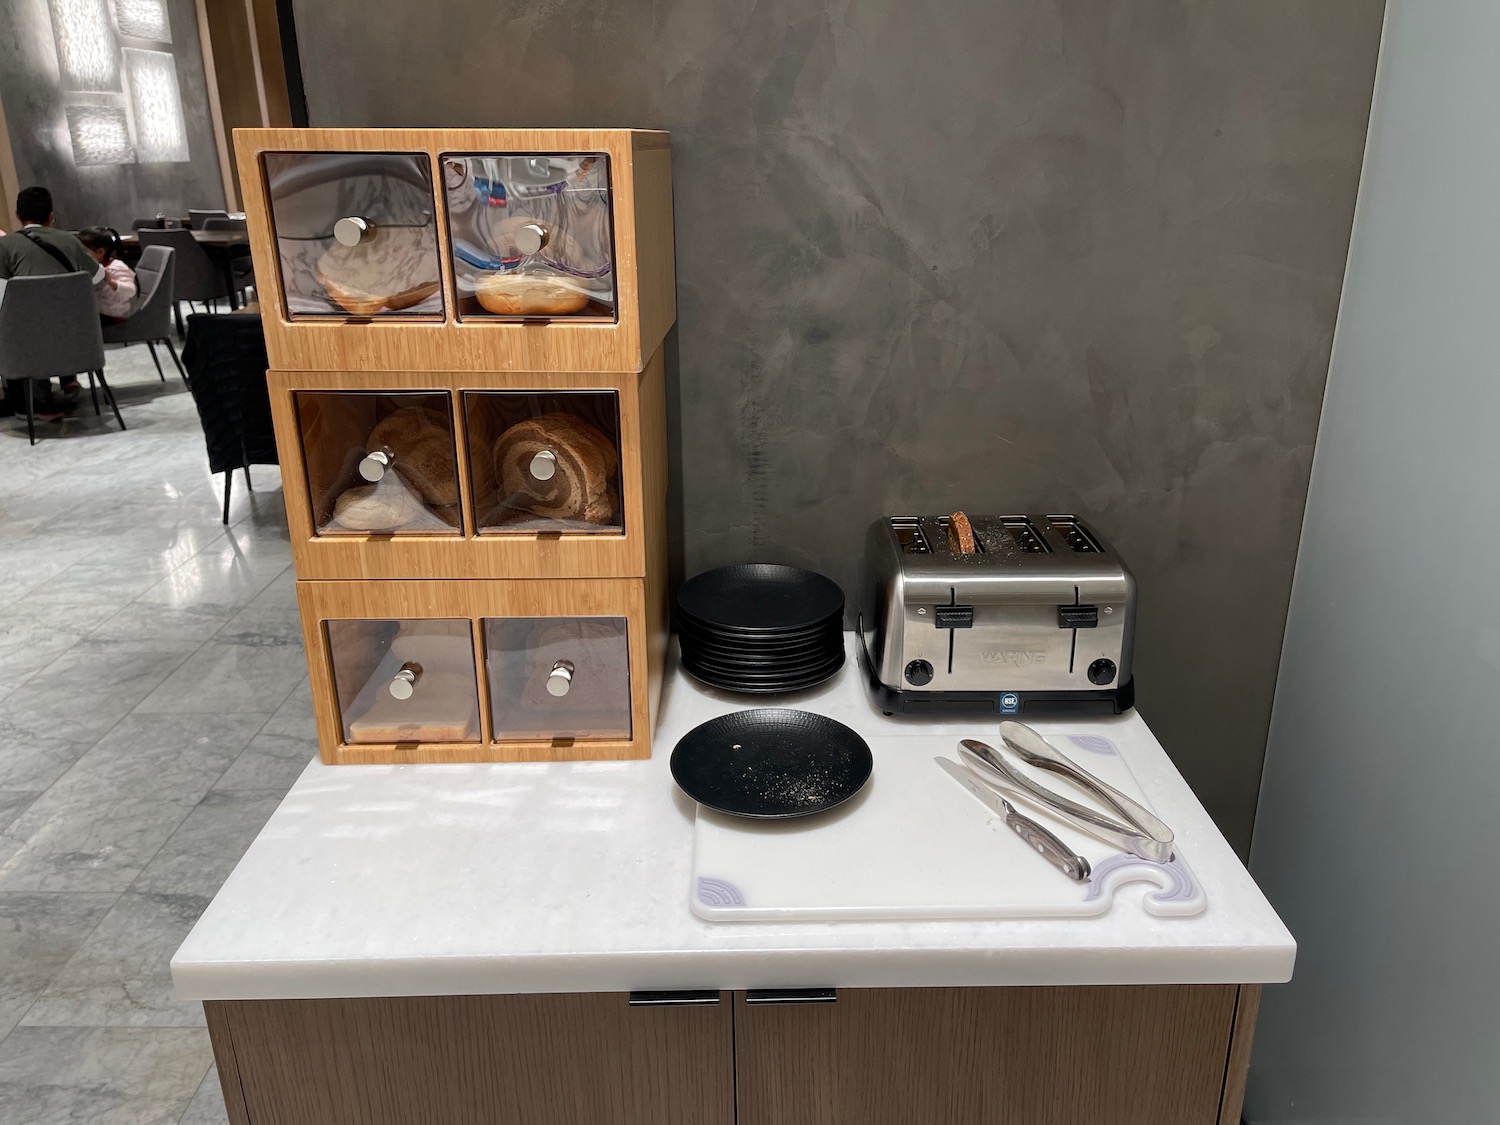 a kitchen counter with a toaster and bread in a case